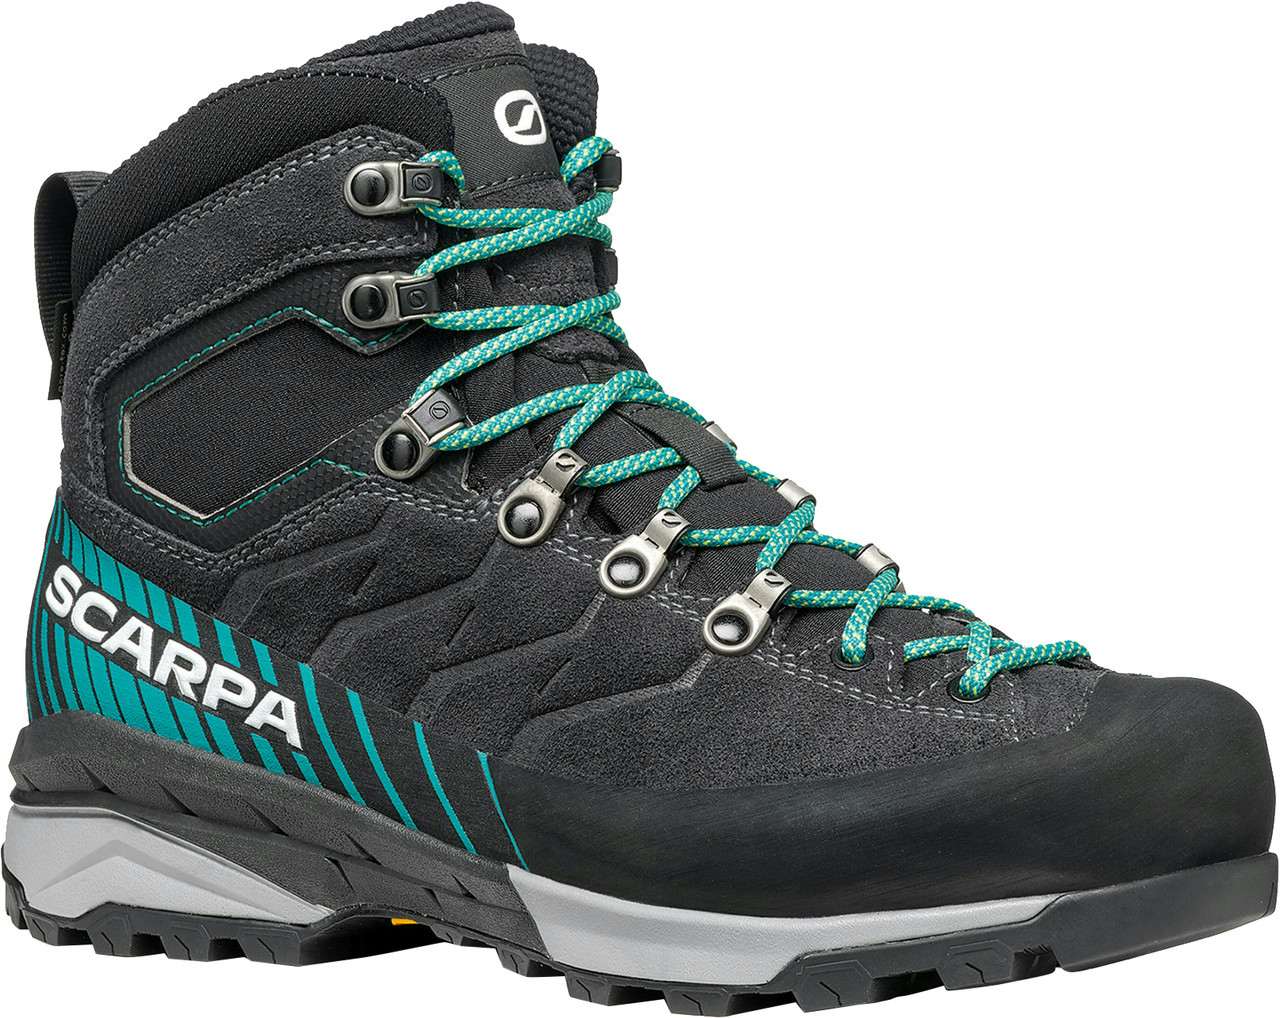 Mescalito Trk Gore-Tex Backpacking Boots Dark Anthracite/Tropical